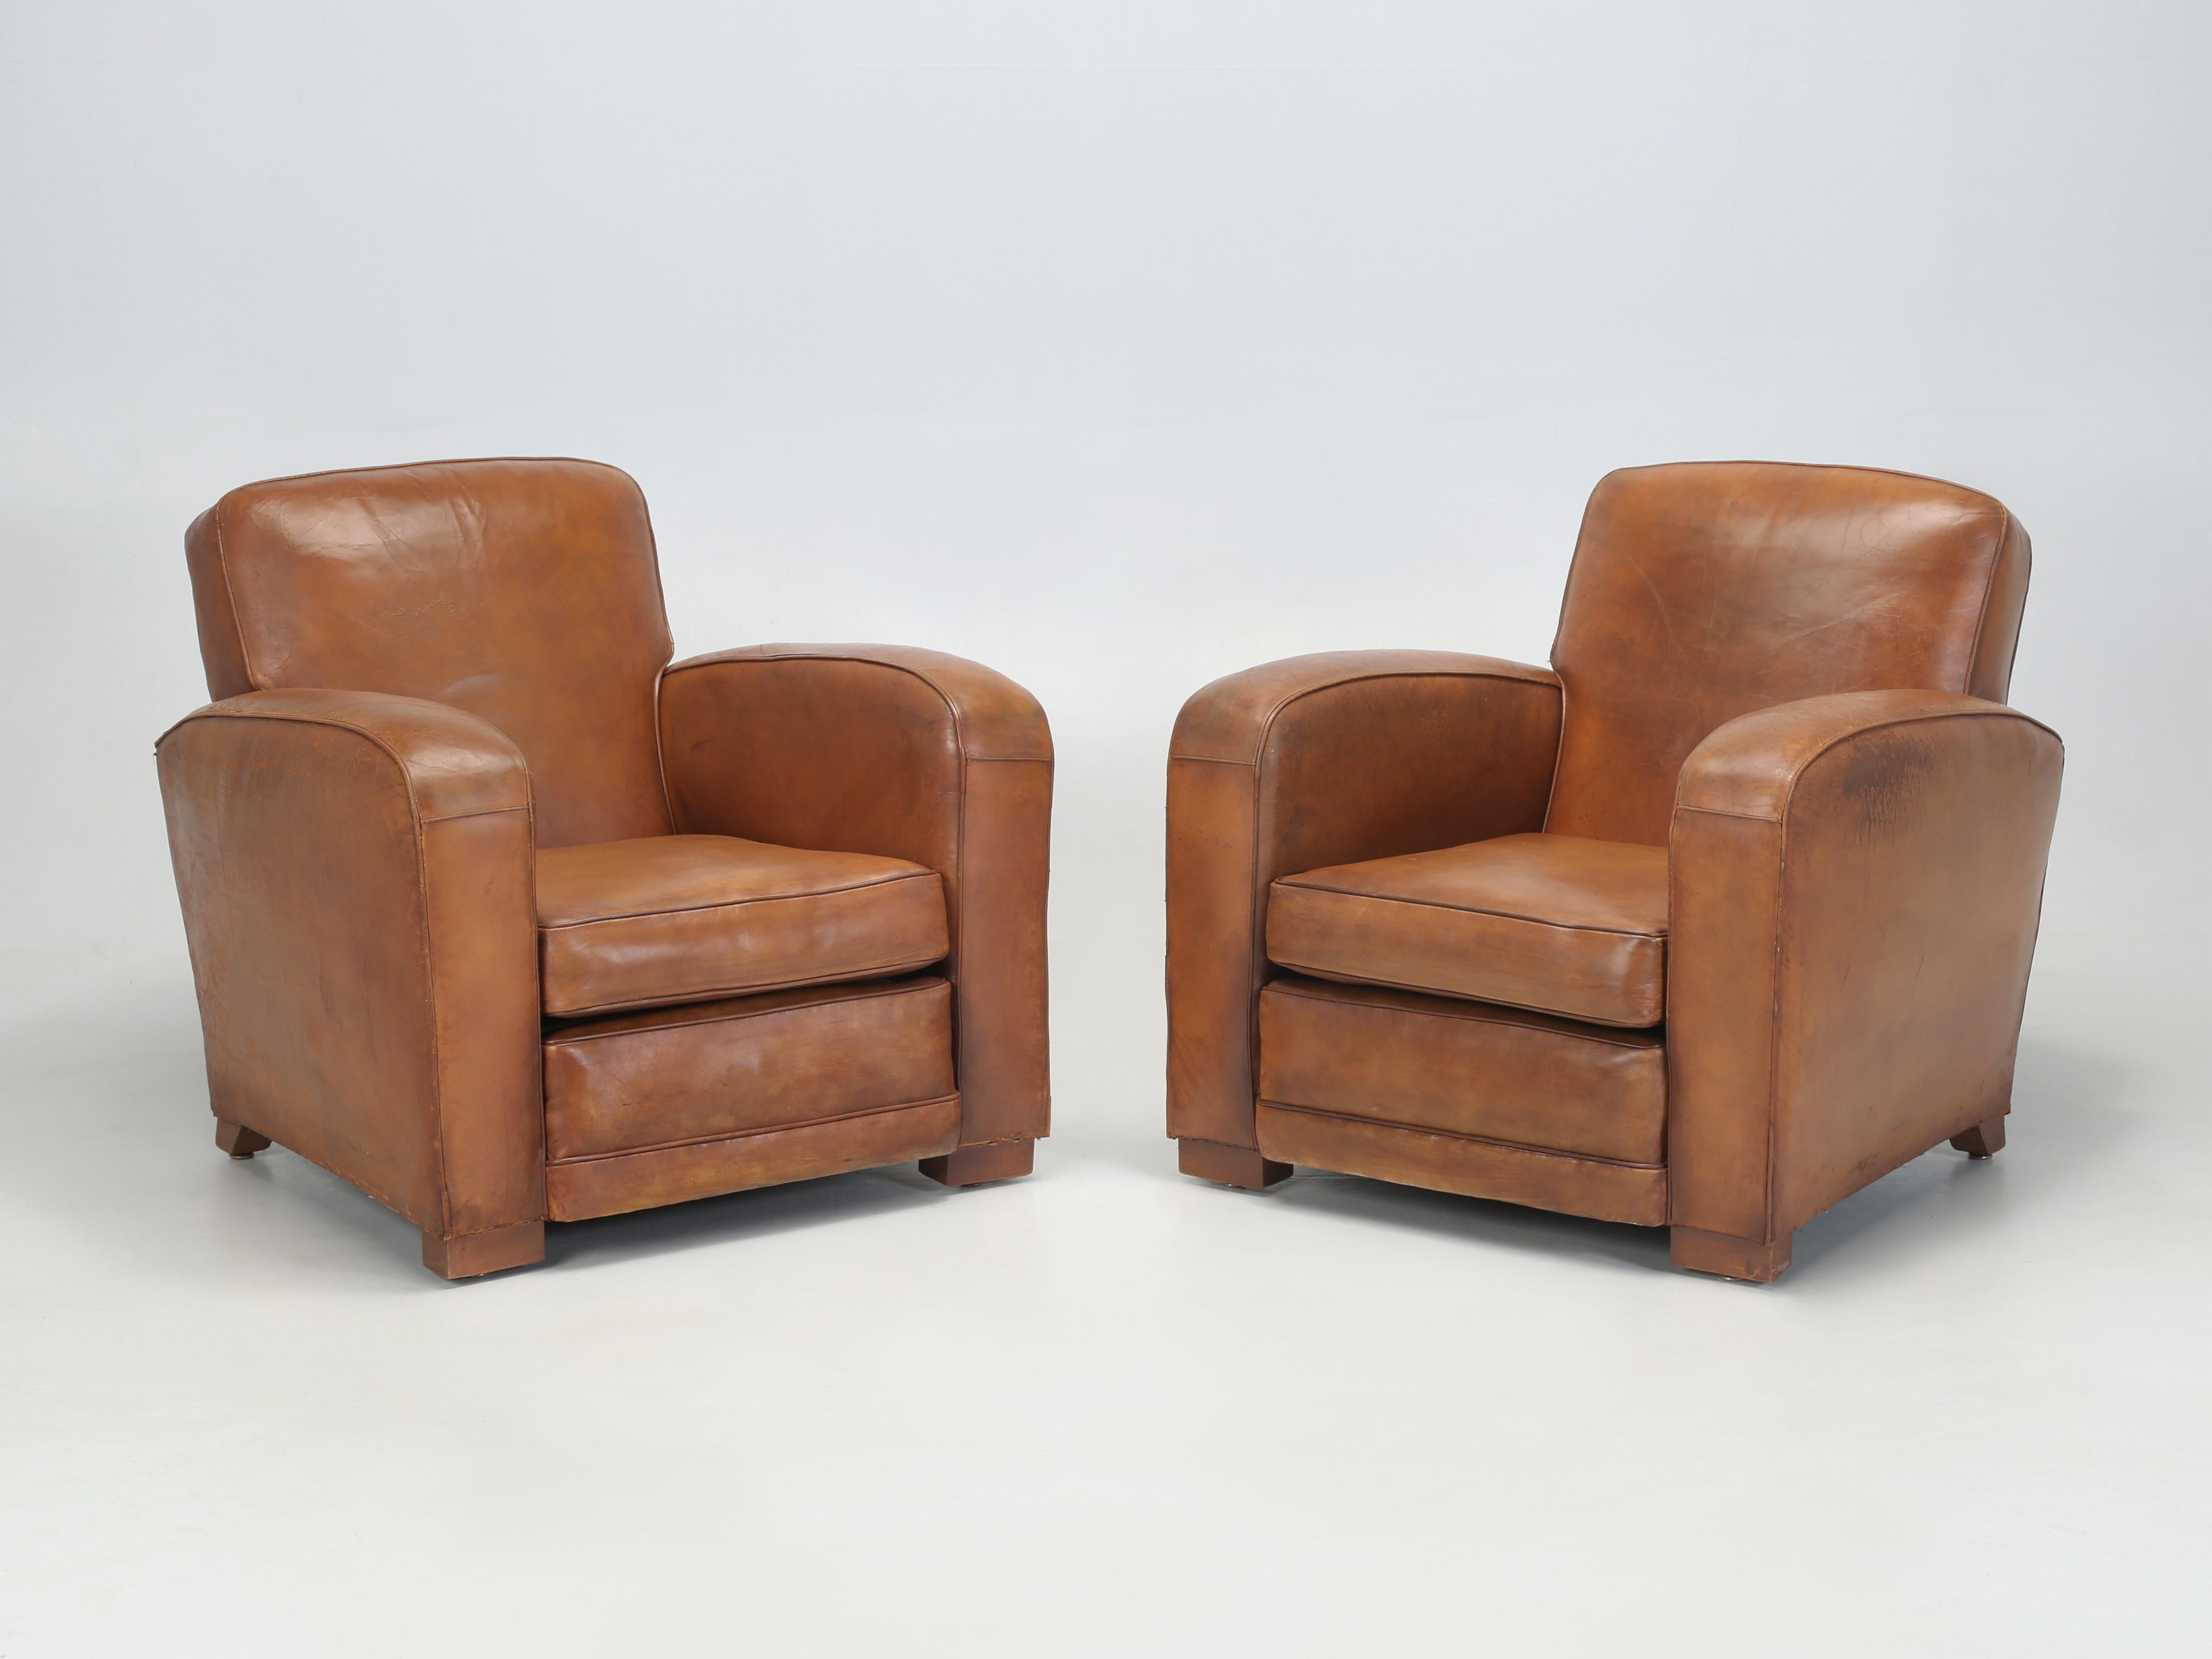 French Club Chairs from the 1930's that have been properly restored internally, while maintaining the 90-year old leather coverings. Each of our French Leather Club Chairs required approximately 40-man-hours of labor to restore in our Old Plank